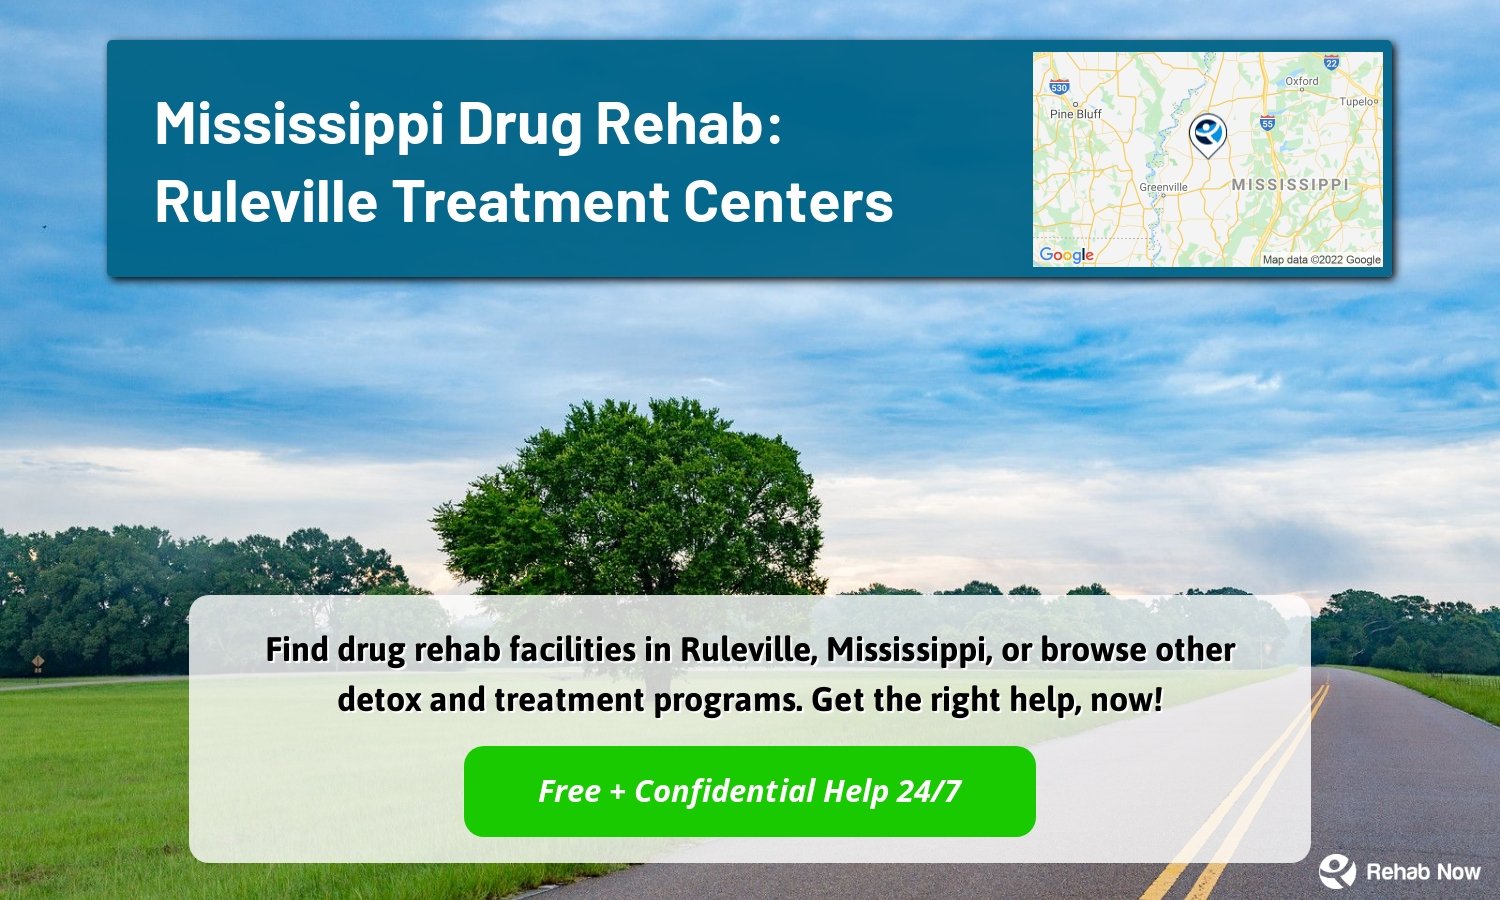 Find drug rehab facilities in Ruleville, Mississippi, or browse other detox and treatment programs. Get the right help, now!